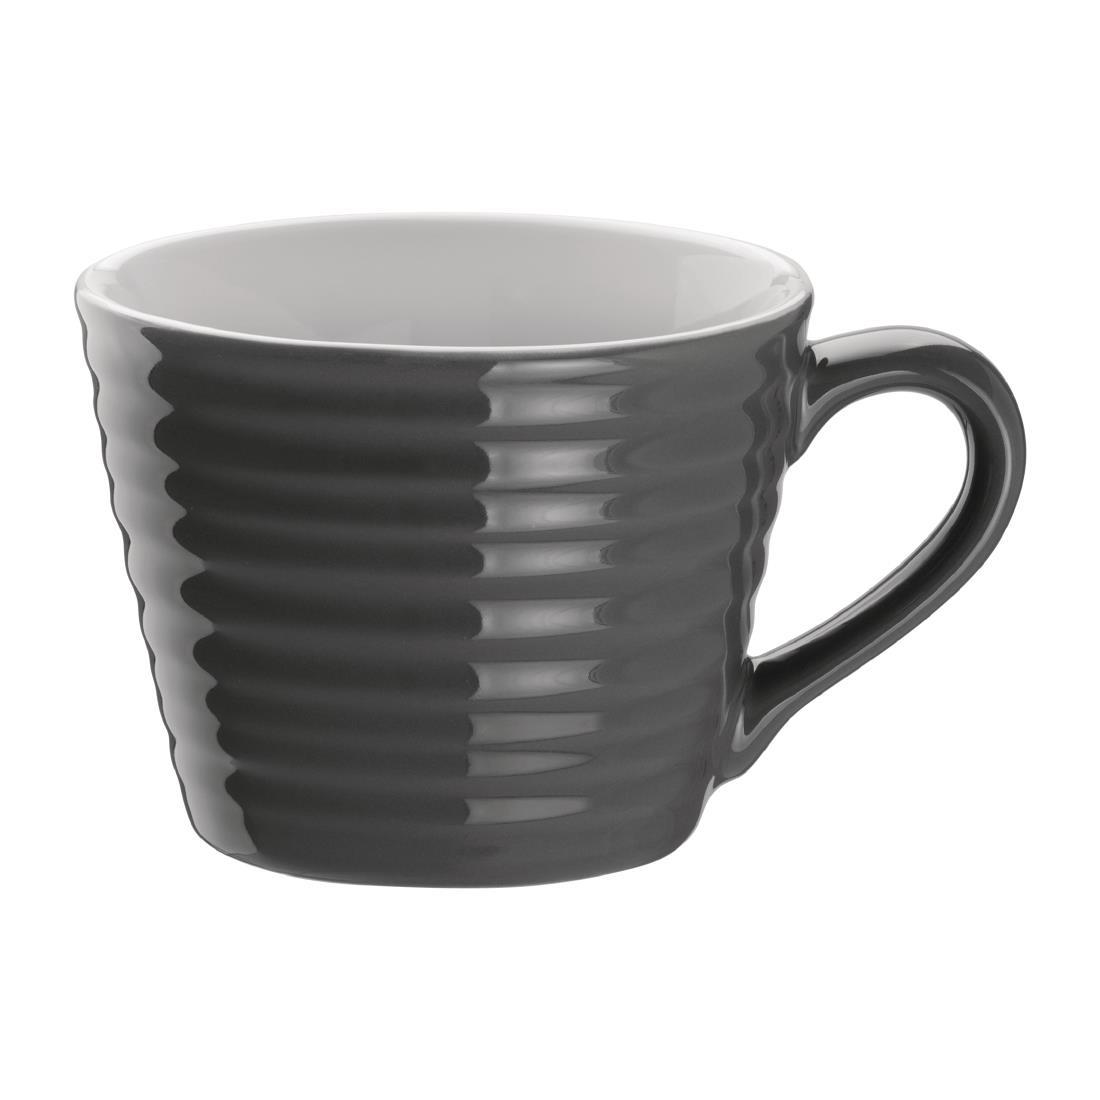 Olympia Café Aroma Mugs Charcoal 230ml (Pack of 6) - DH639  - 1